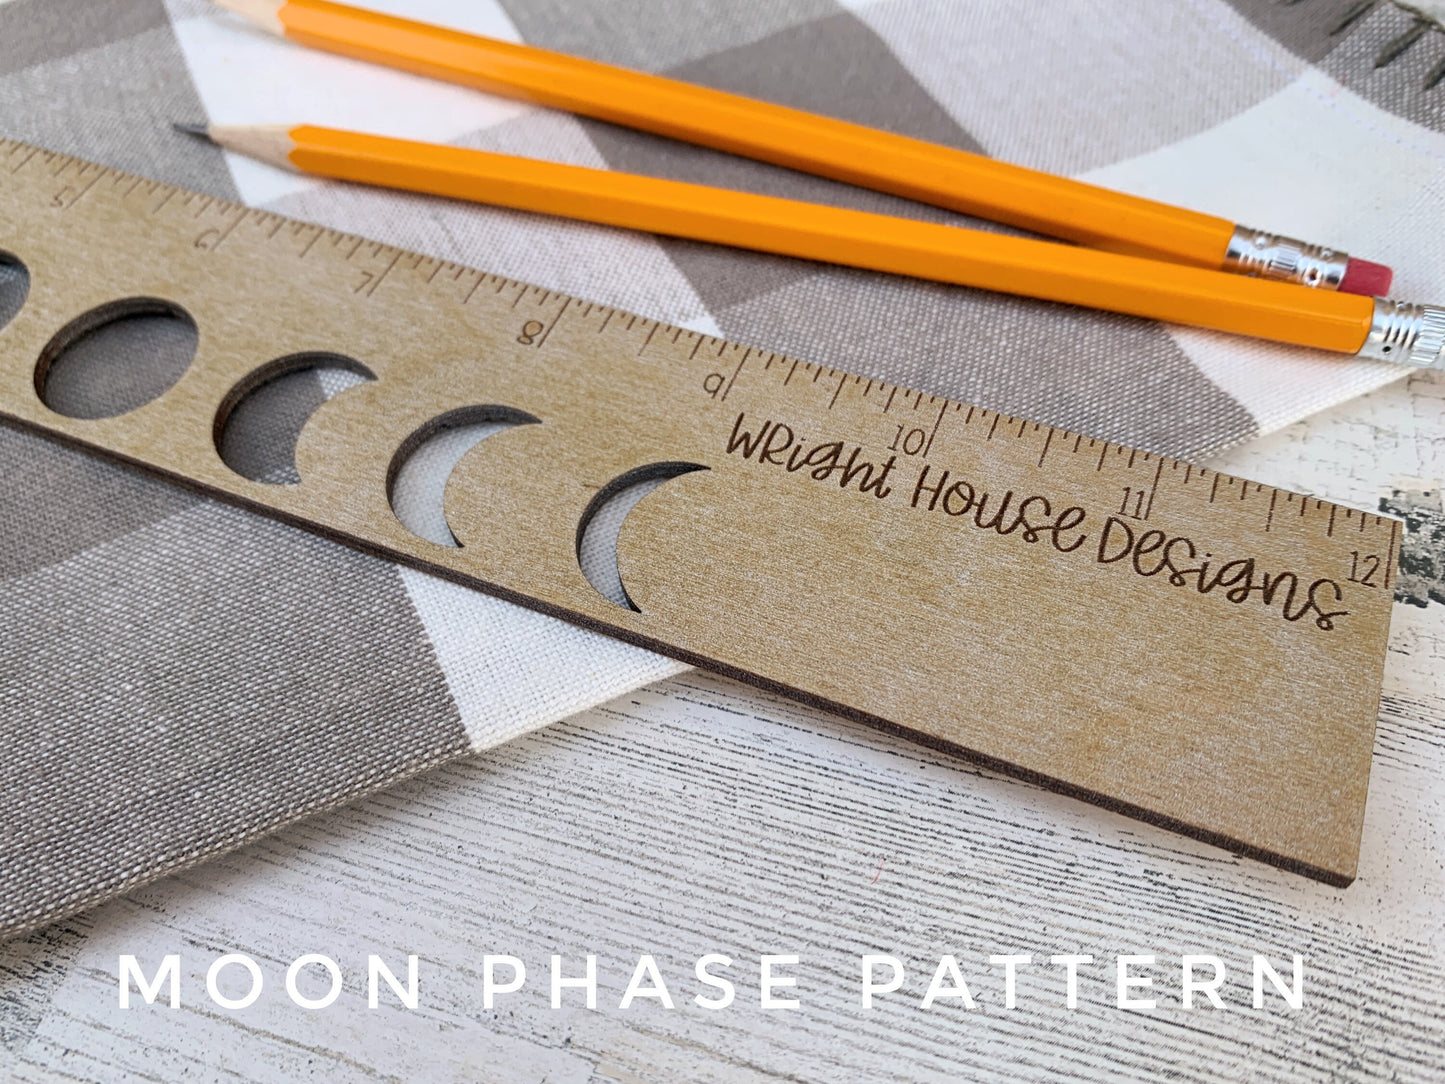 Wooden Laser Engraved Standard Ruler - Decorative Patterns - Personalized School and Office Supplies - Custom Small Business Branding Tool